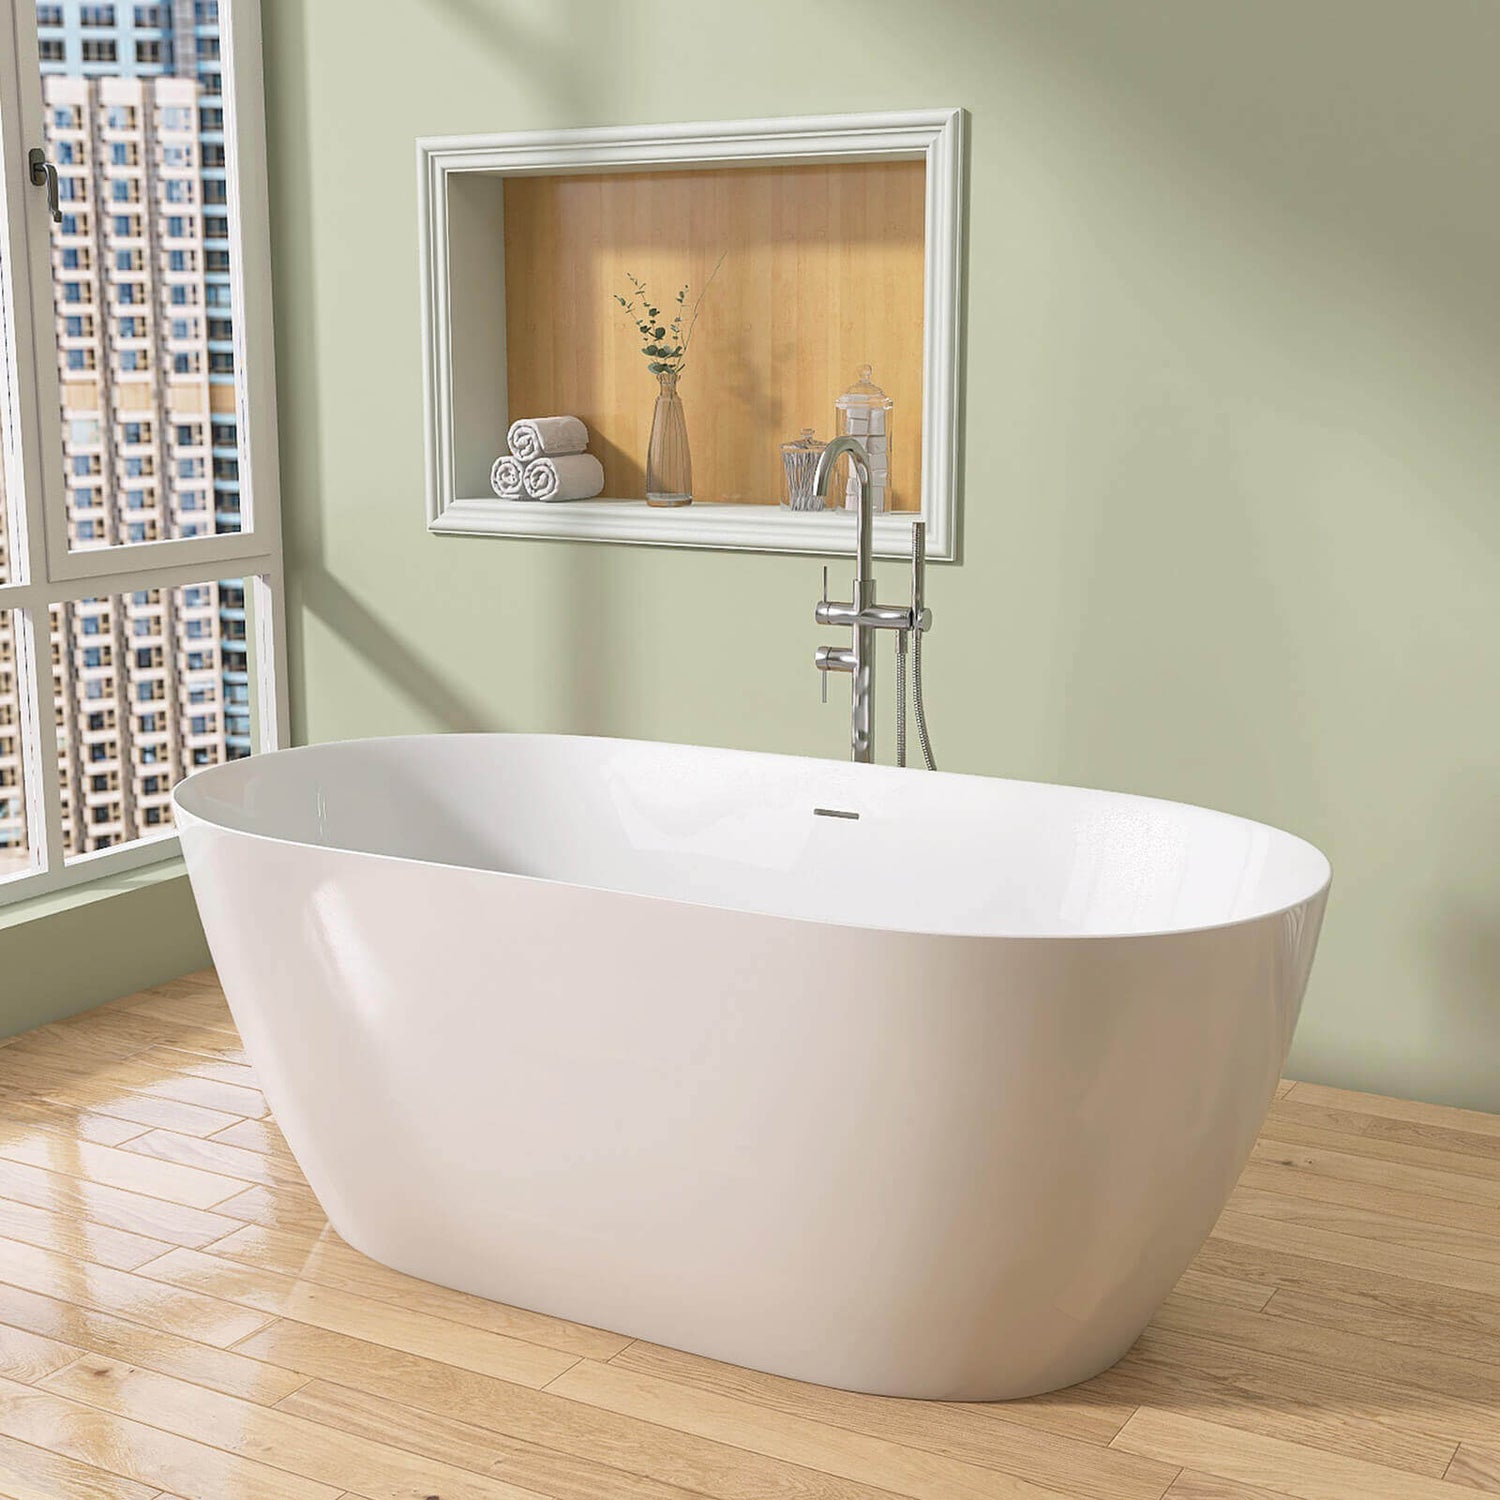 Top of the line 51 inch acrylic freestanding soaking tub